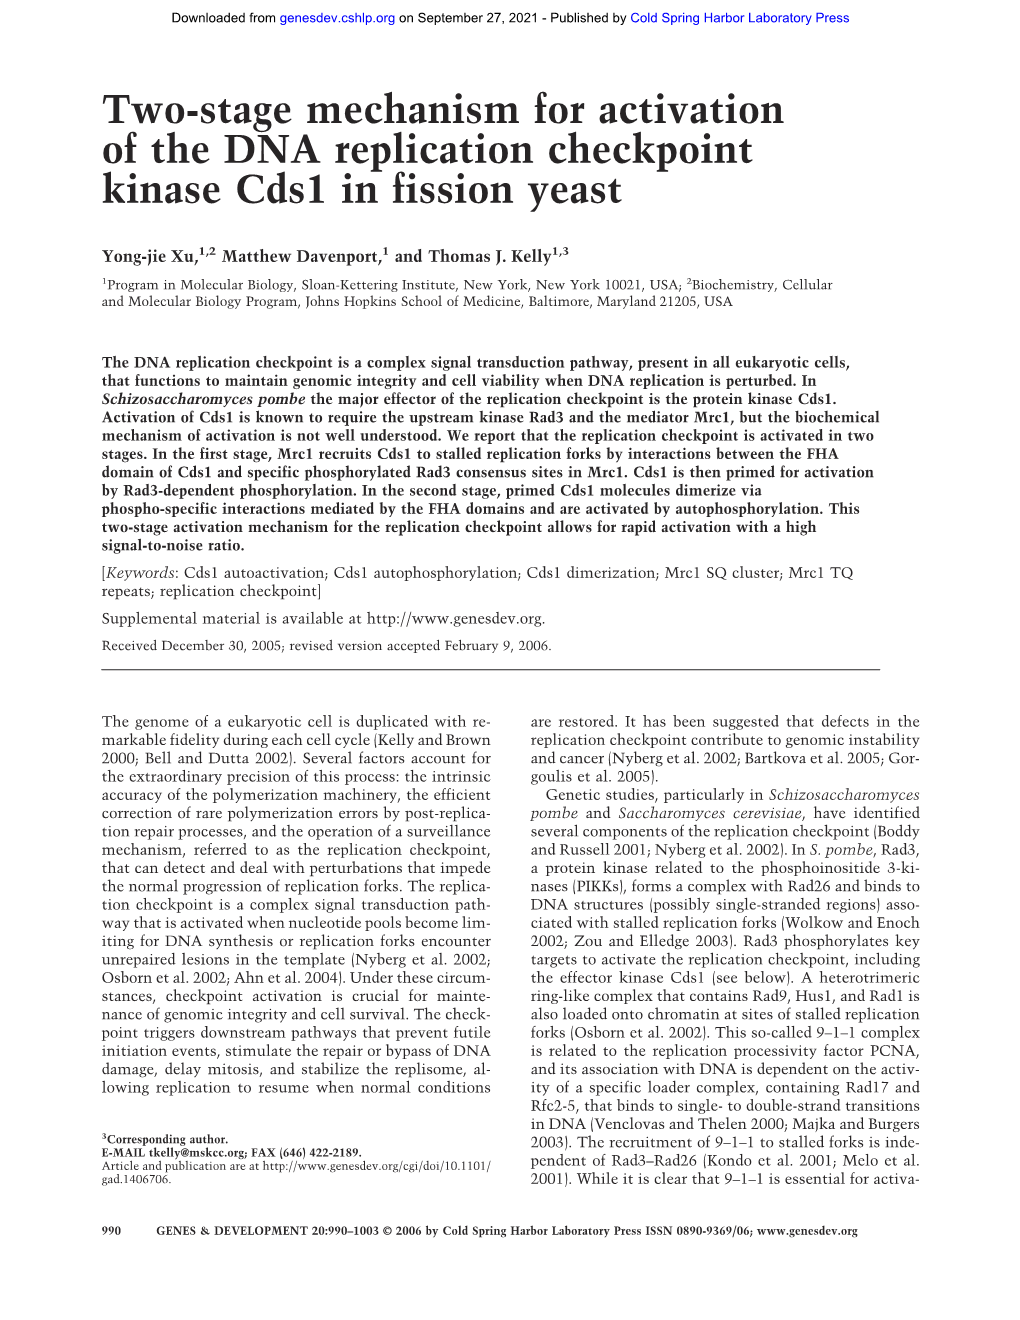 Two-Stage Mechanism for Activation of the DNA Replication Checkpoint Kinase Cds1 in Fission Yeast